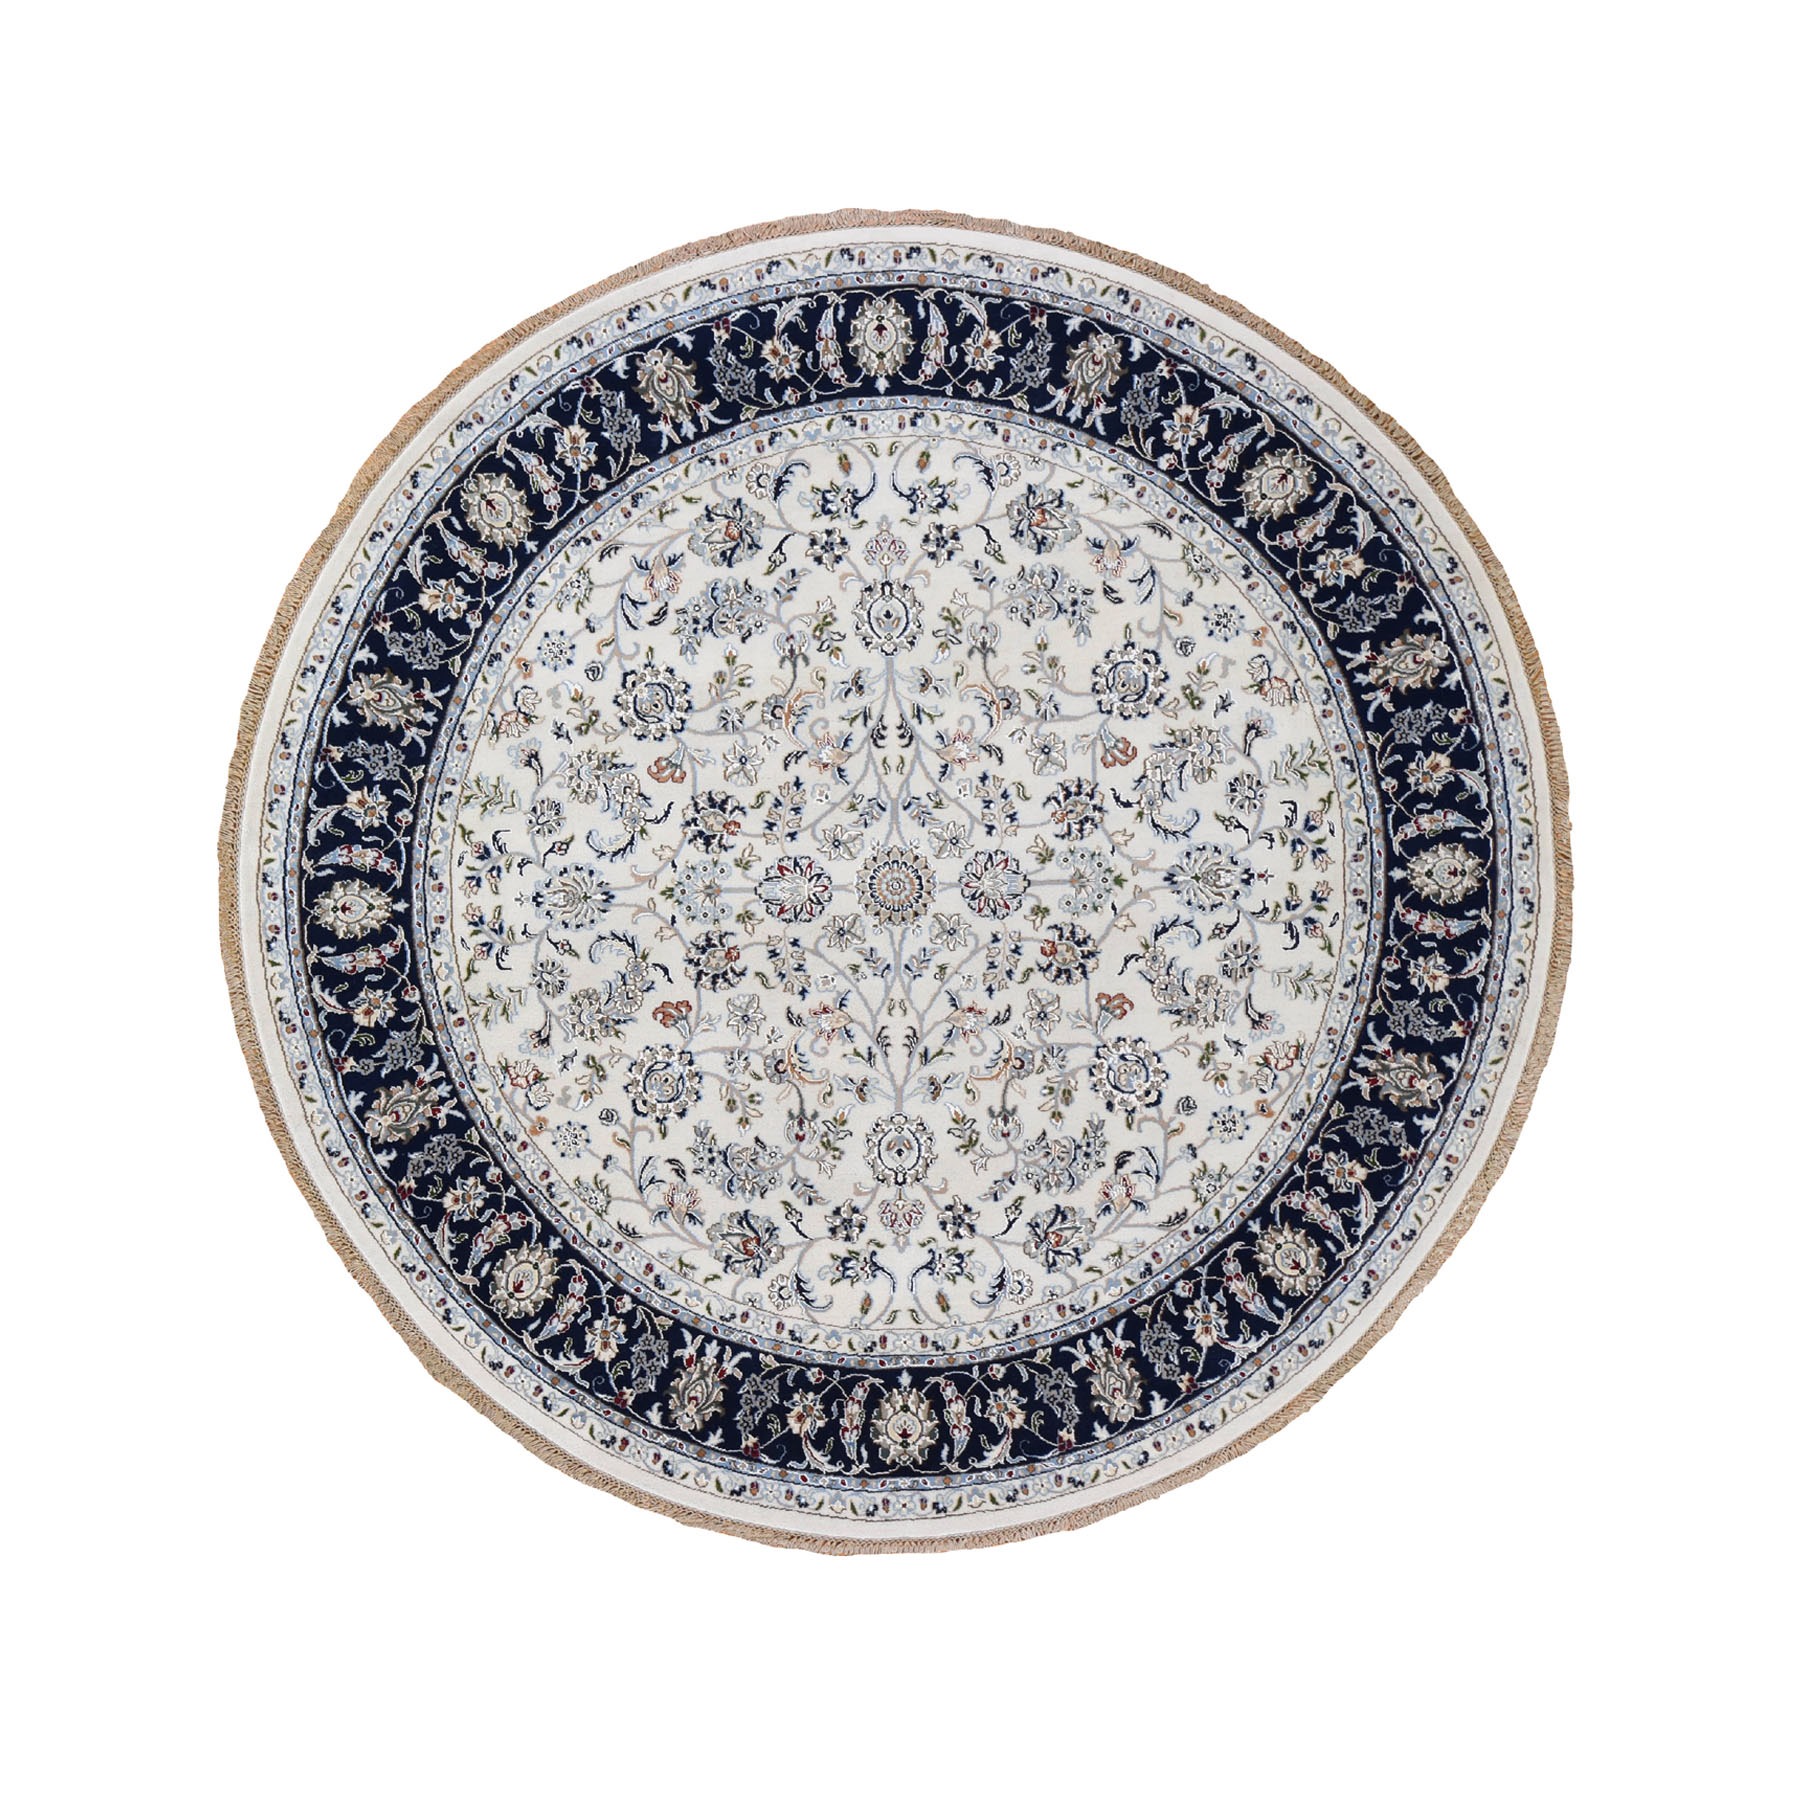 6-1 x6-1  Ivory Nain Wool And Silk 250 KPSI All Over Design Hand Knotted Round Oriental Rug 